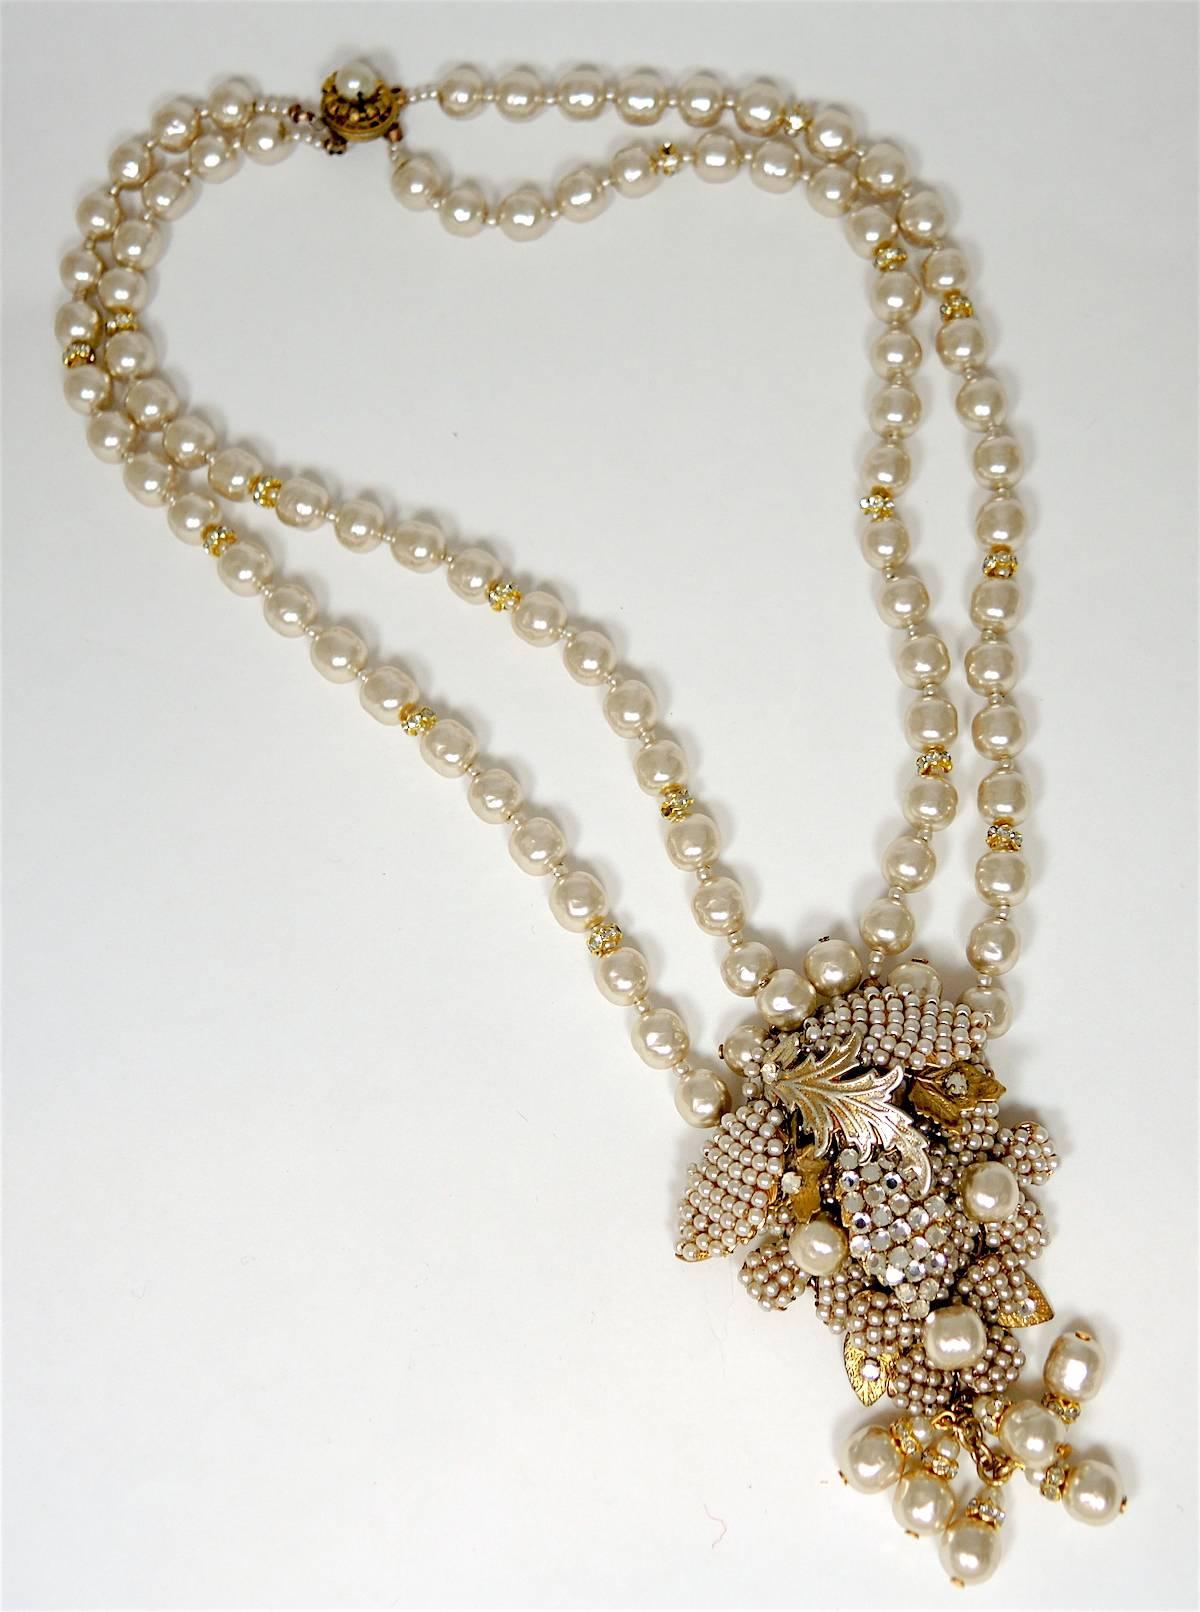 This stunning vintage signed Miriam Haskell necklace features 2-strands of faux pearls leading to a floral centerpiece. This piece has 6 dangling faux pearls at the bottom. This necklace measures 18” x 3/4” and the centerpiece measures 4-1/8” x 2”. 